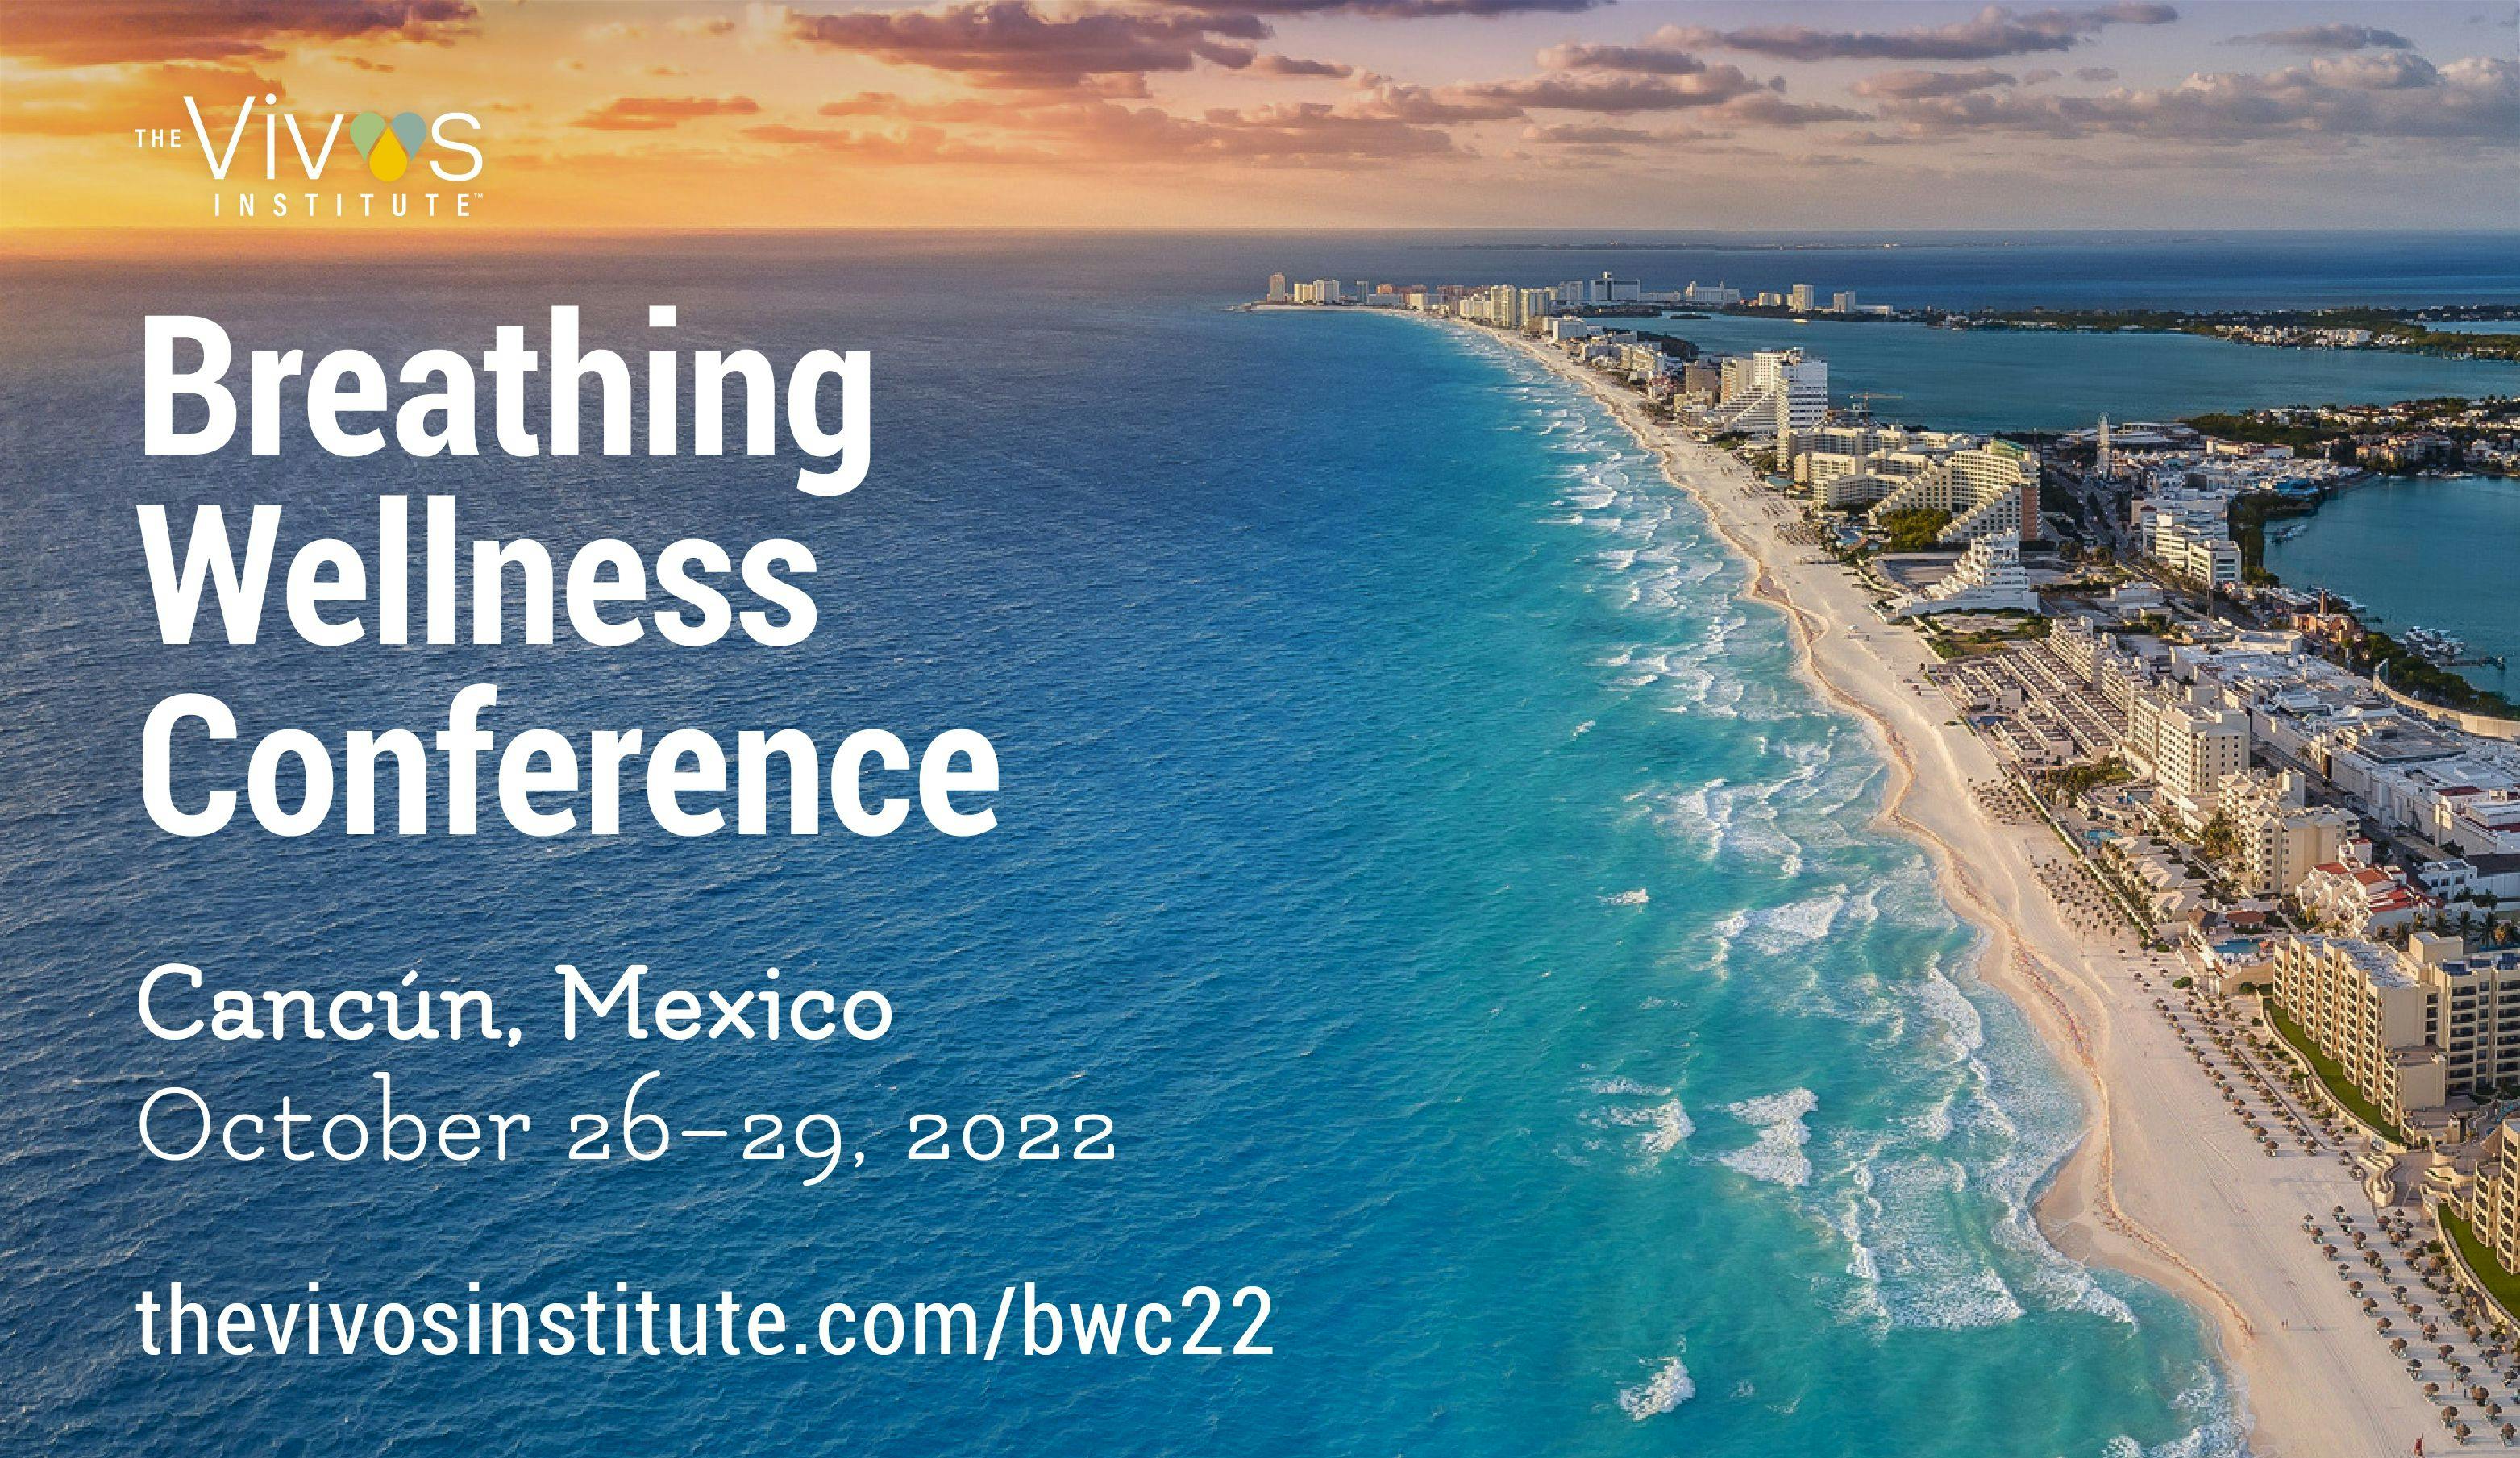 Vivos Therapeutics Will Host 4th Annual Breathing Wellness Conference in Cancún